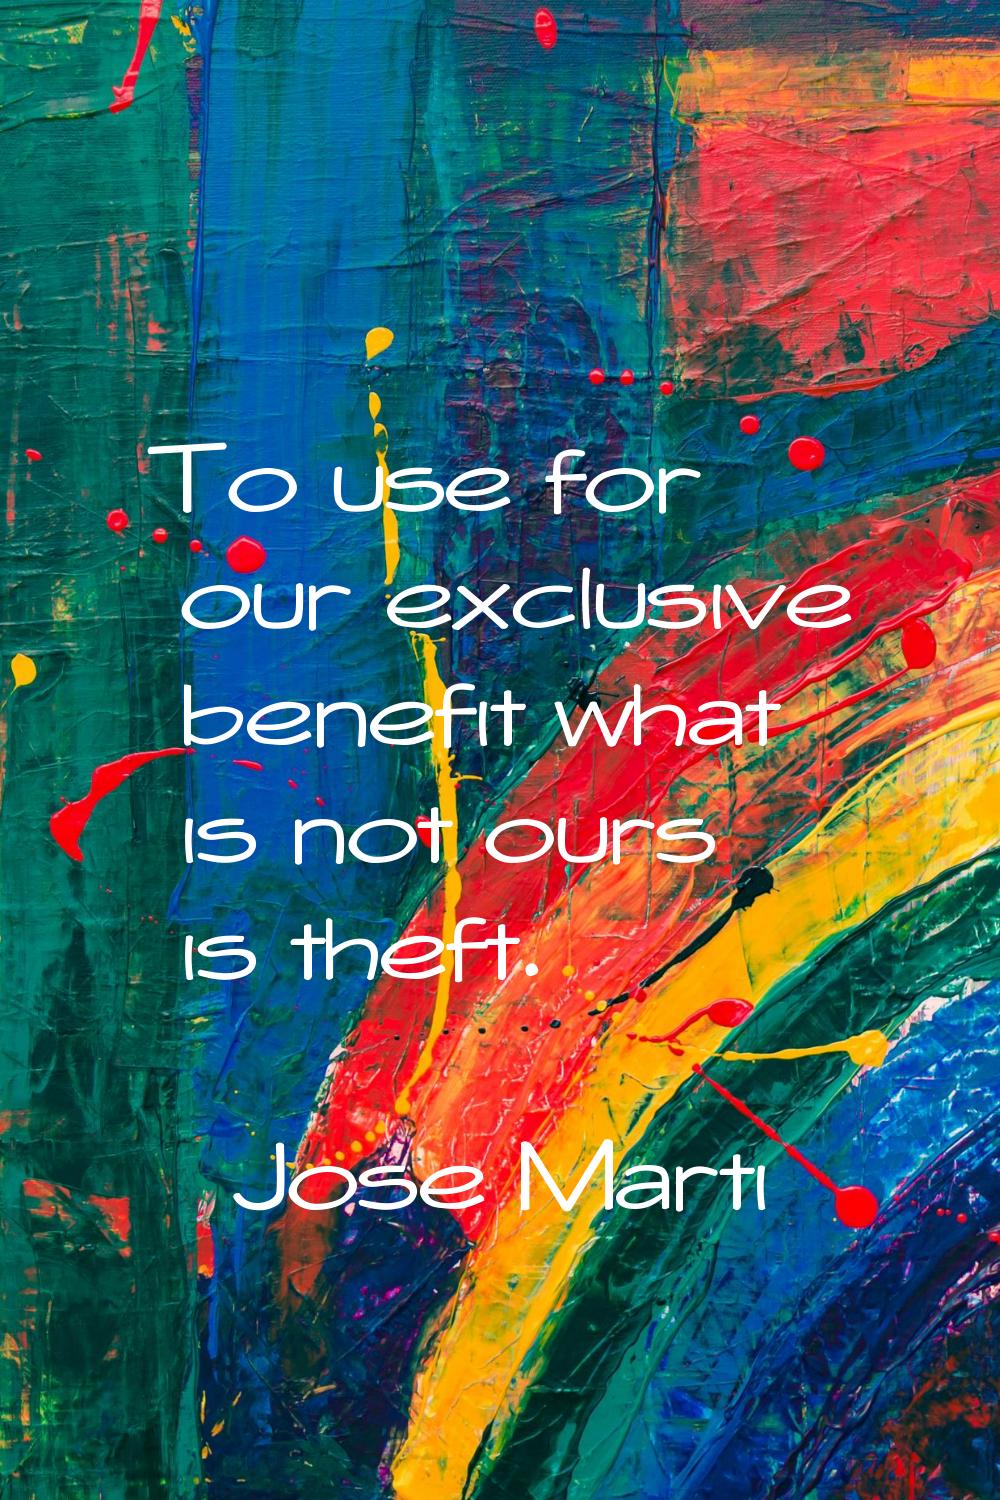 To use for our exclusive benefit what is not ours is theft.